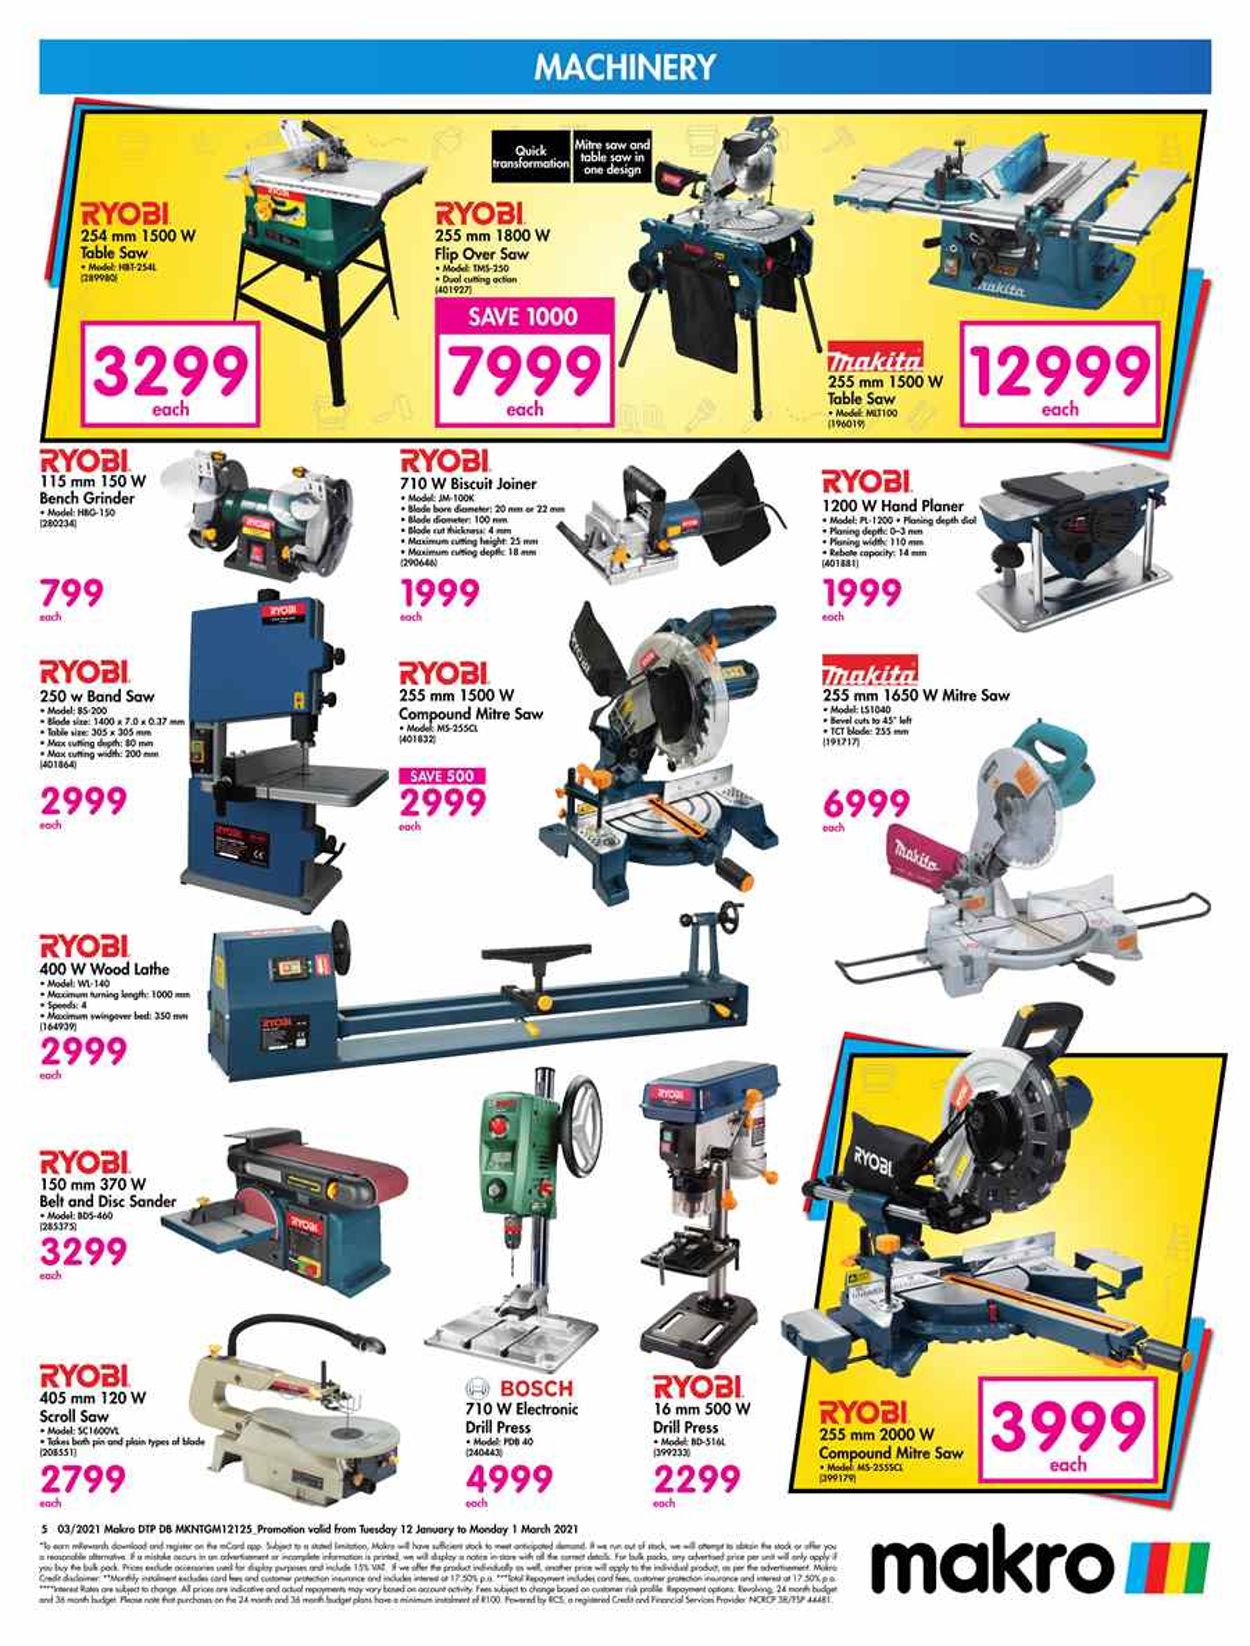 Makro Back to Site 2021 Catalogue - 2021/01/12-2021/03/01 (Page 5)